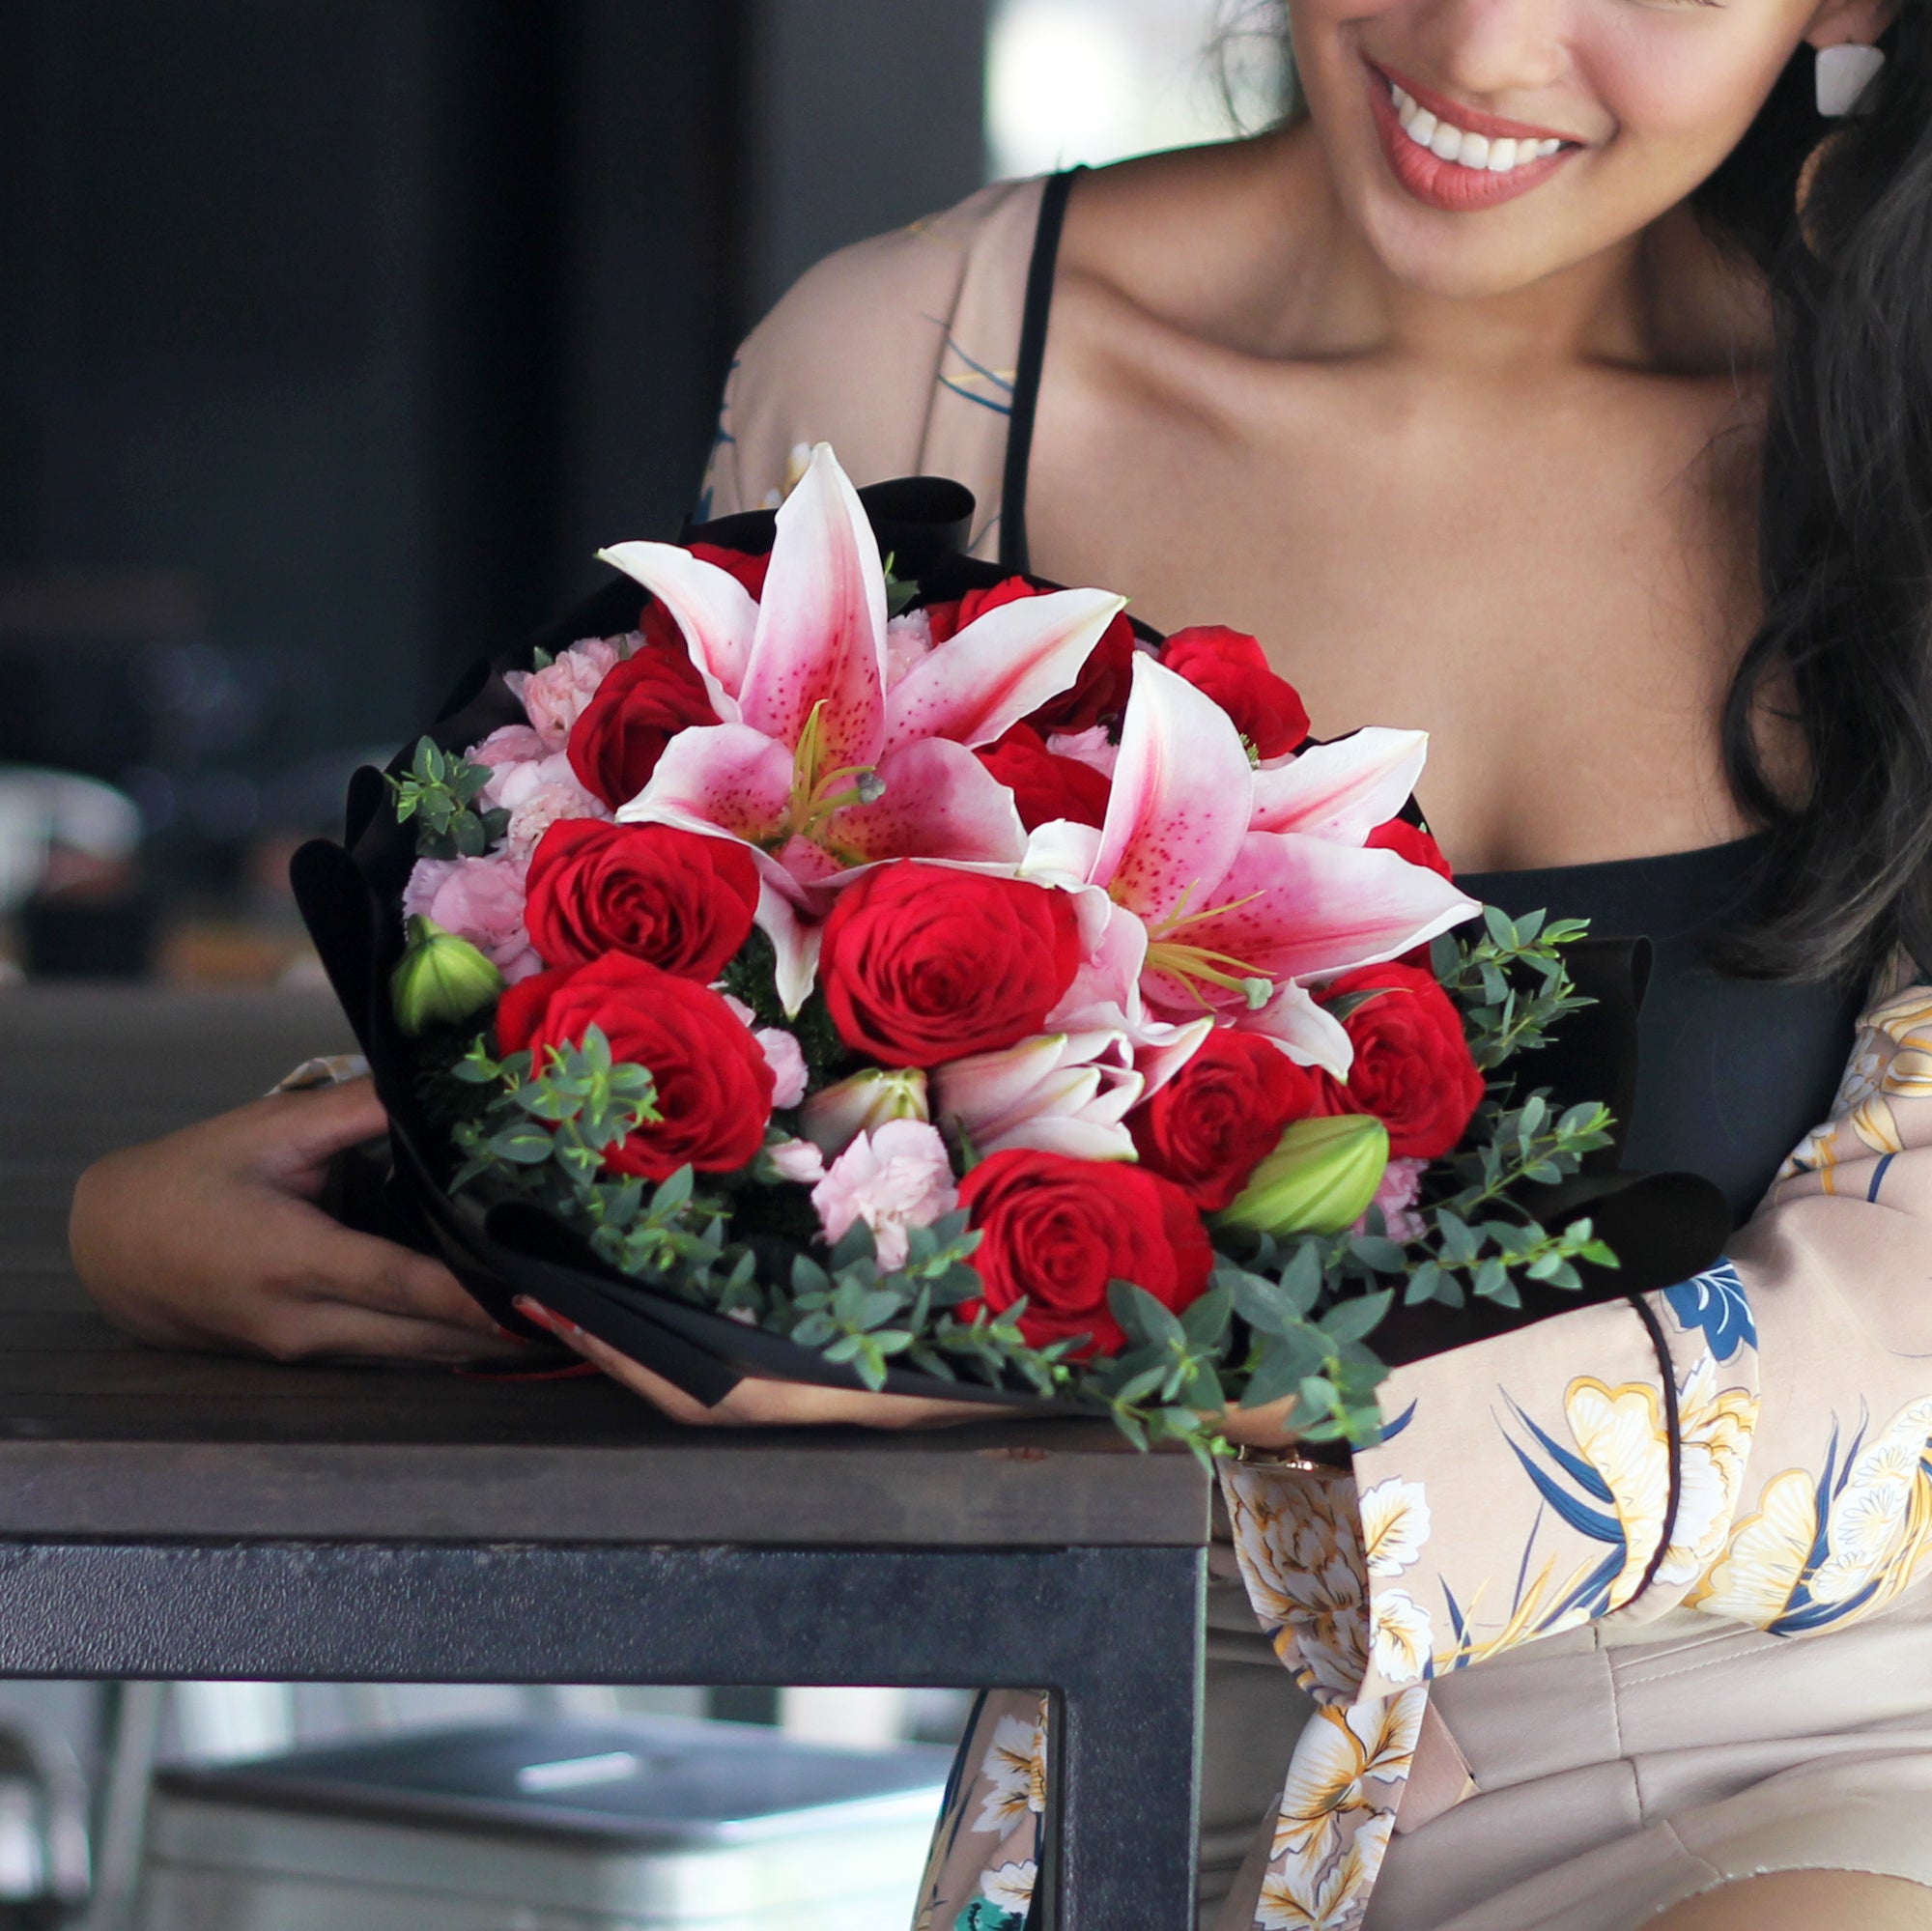 Why Gifting Flowers Will Never Run Out of Style